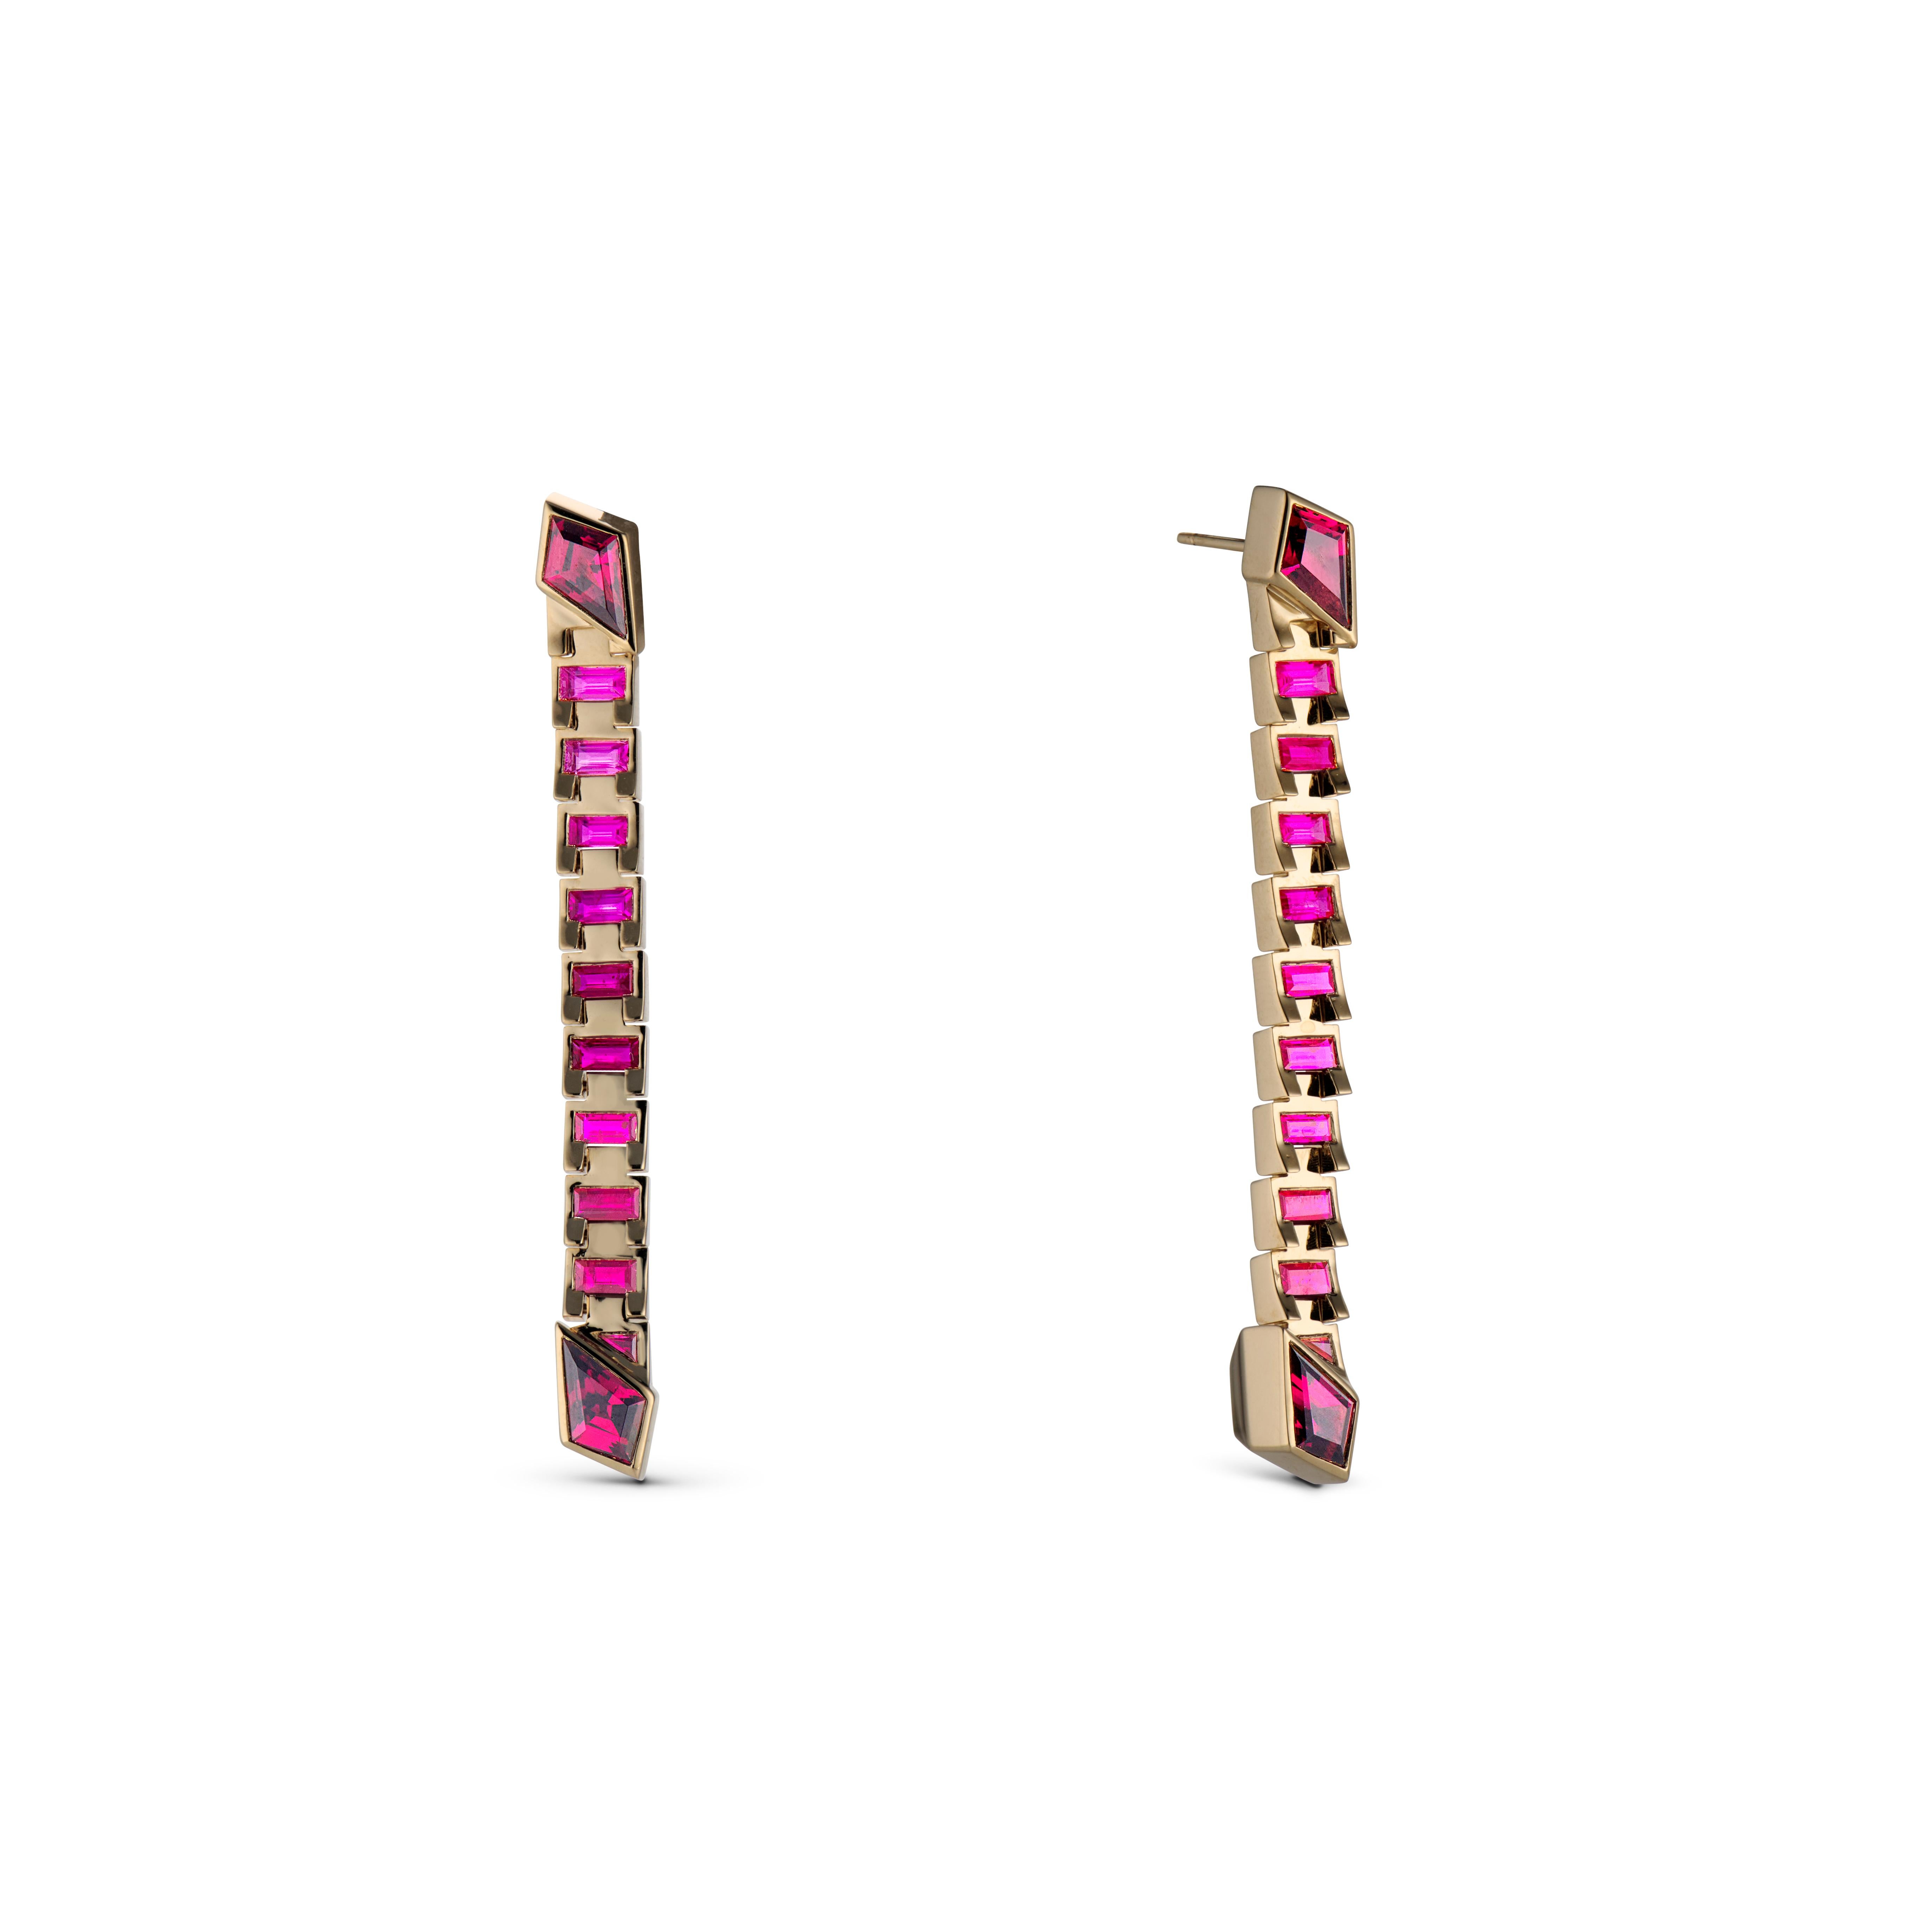 The ARIEL DROP HOOPS defy expectations as a pair of earrings that offer versatility and distinctive style. Each baguette is connected by a precisely designed hinge, allowing these striking statement earrings to be worn either vertically for a